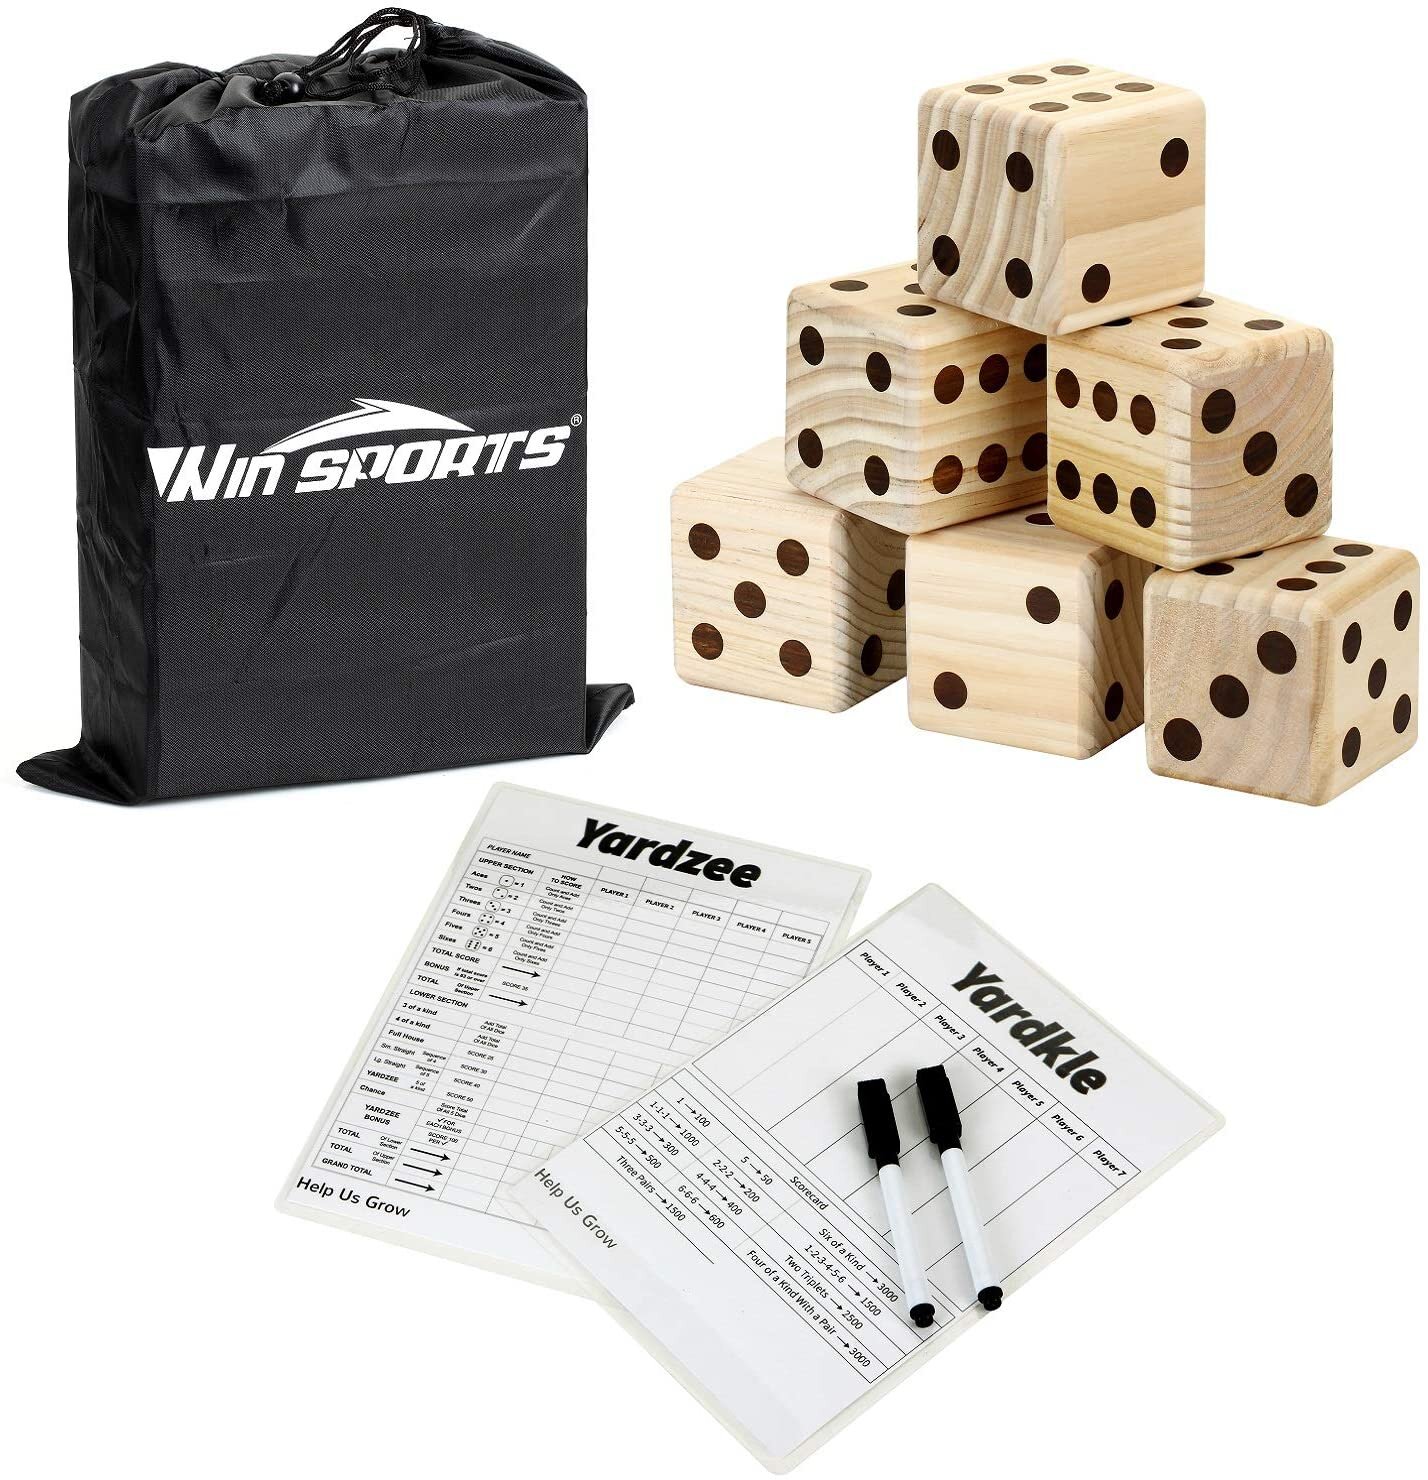 SPORTS Yard Dice Set -Giant Wooden, Large Dice 3.5",Lawn Game 